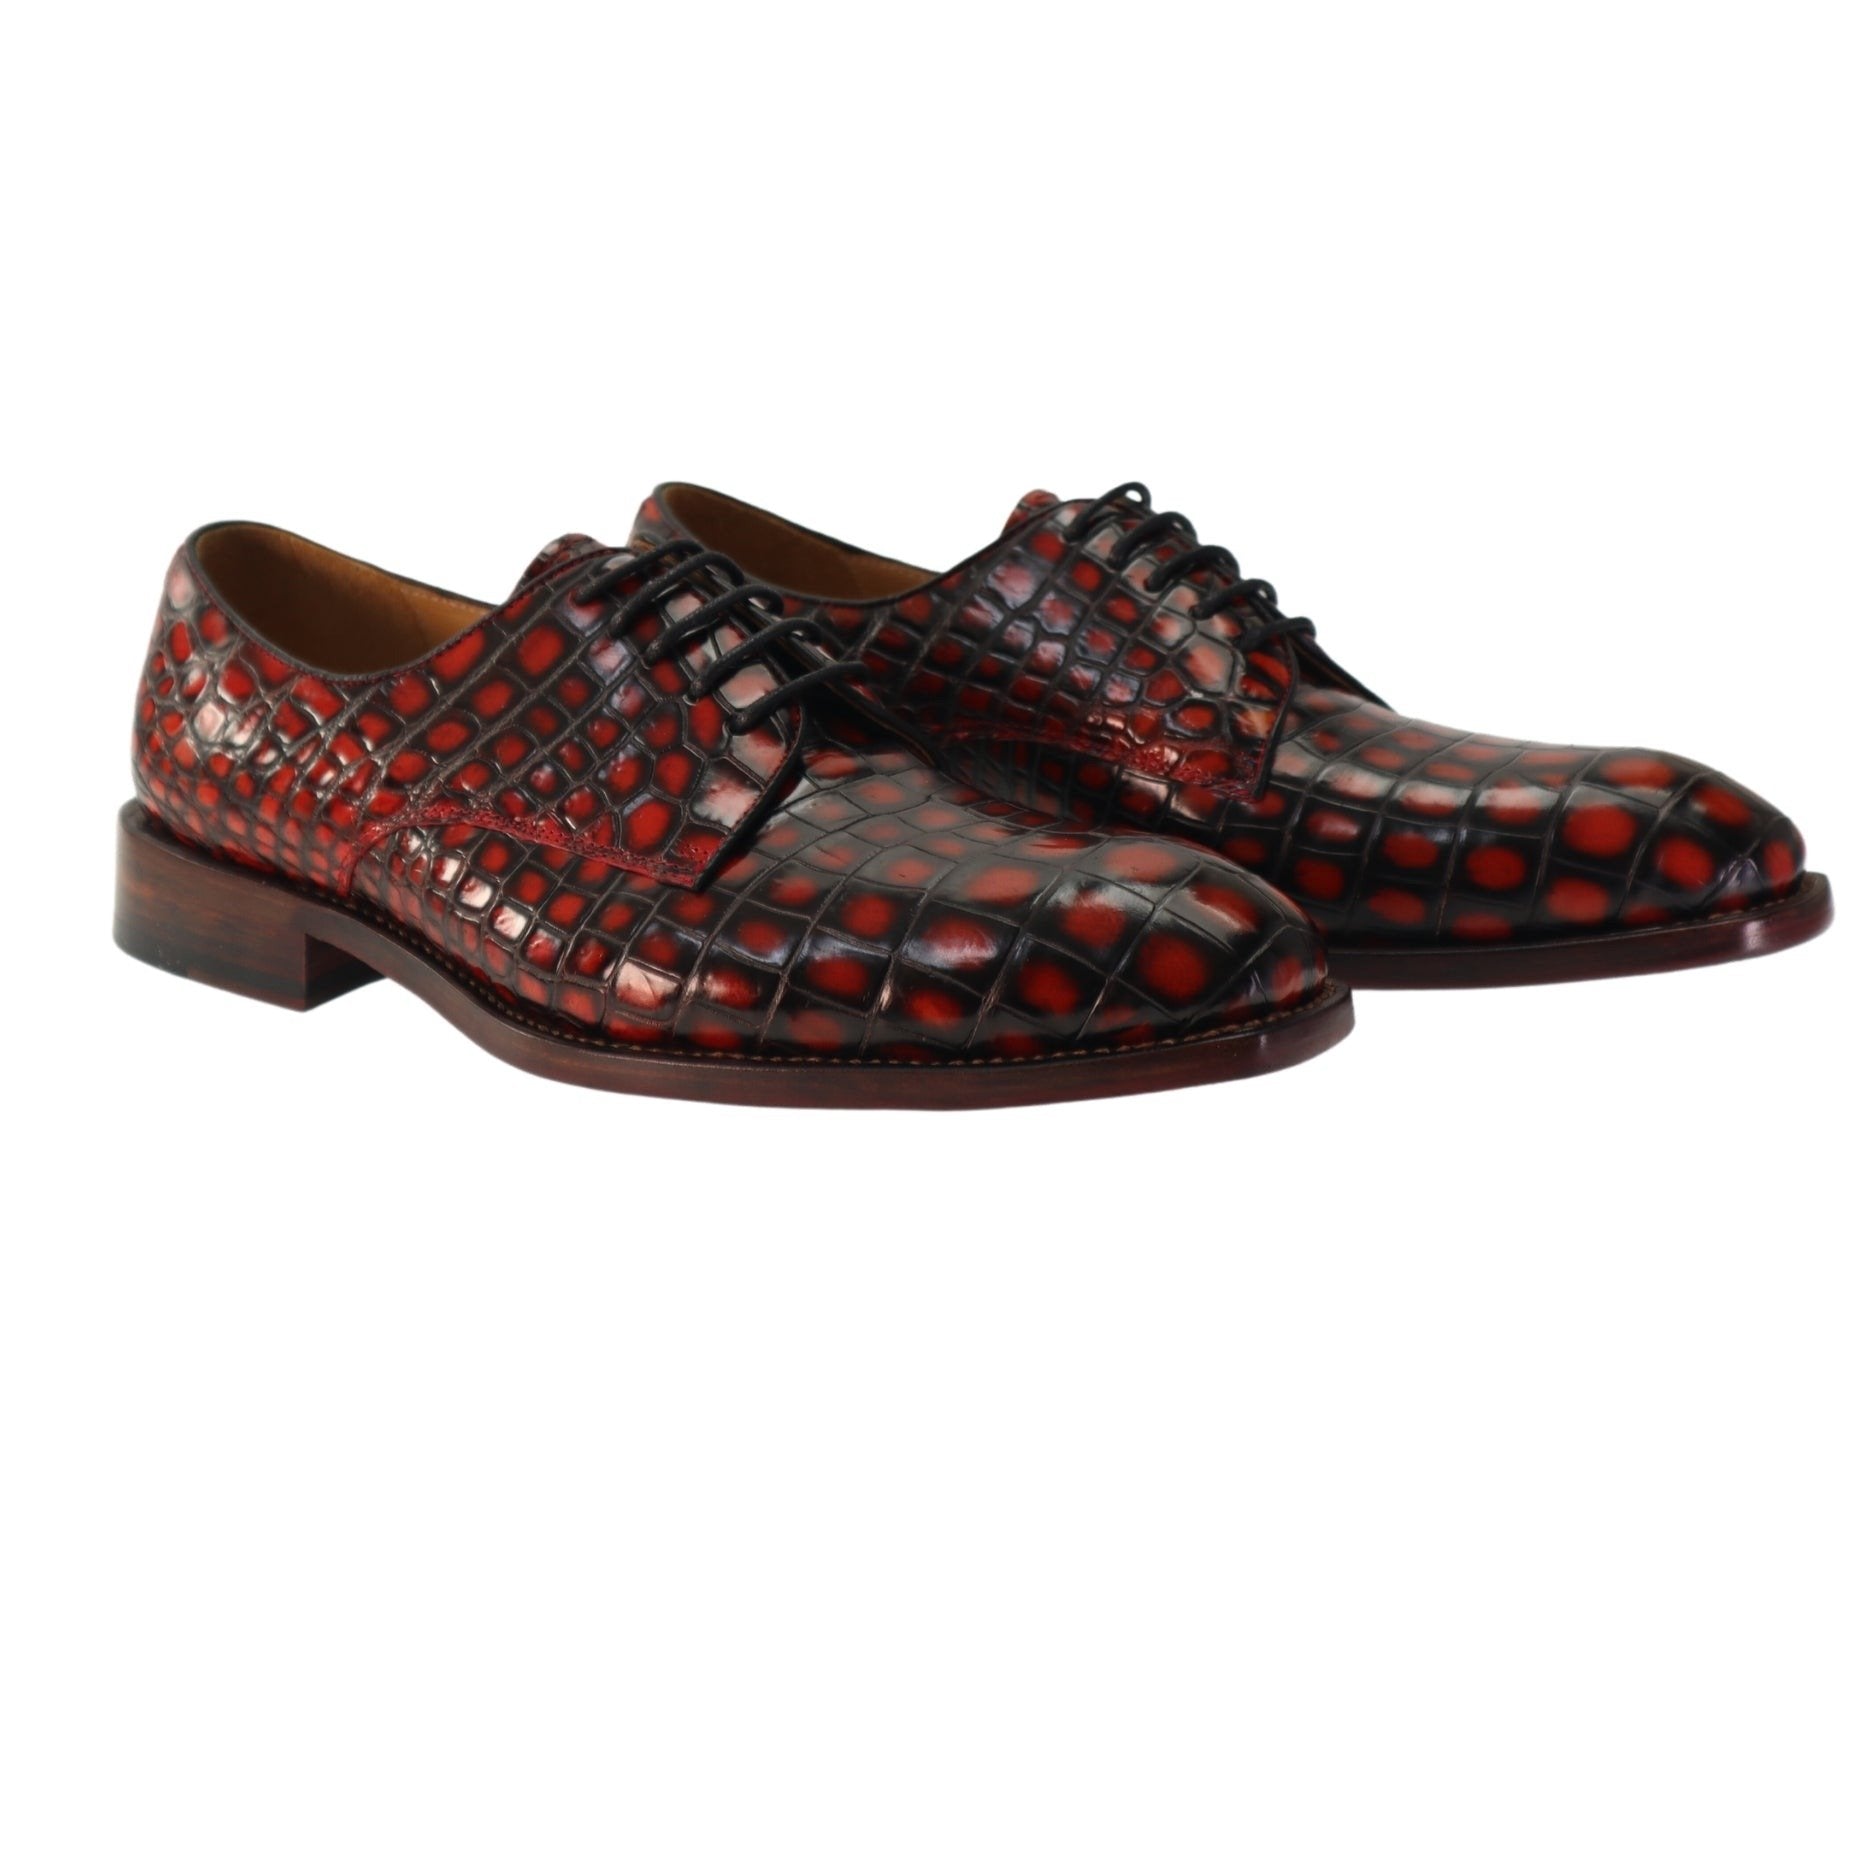 Genuine Alligator Leather Men’s Derby Perforated Lace-Up Dress Shoes Red Patina Alligator